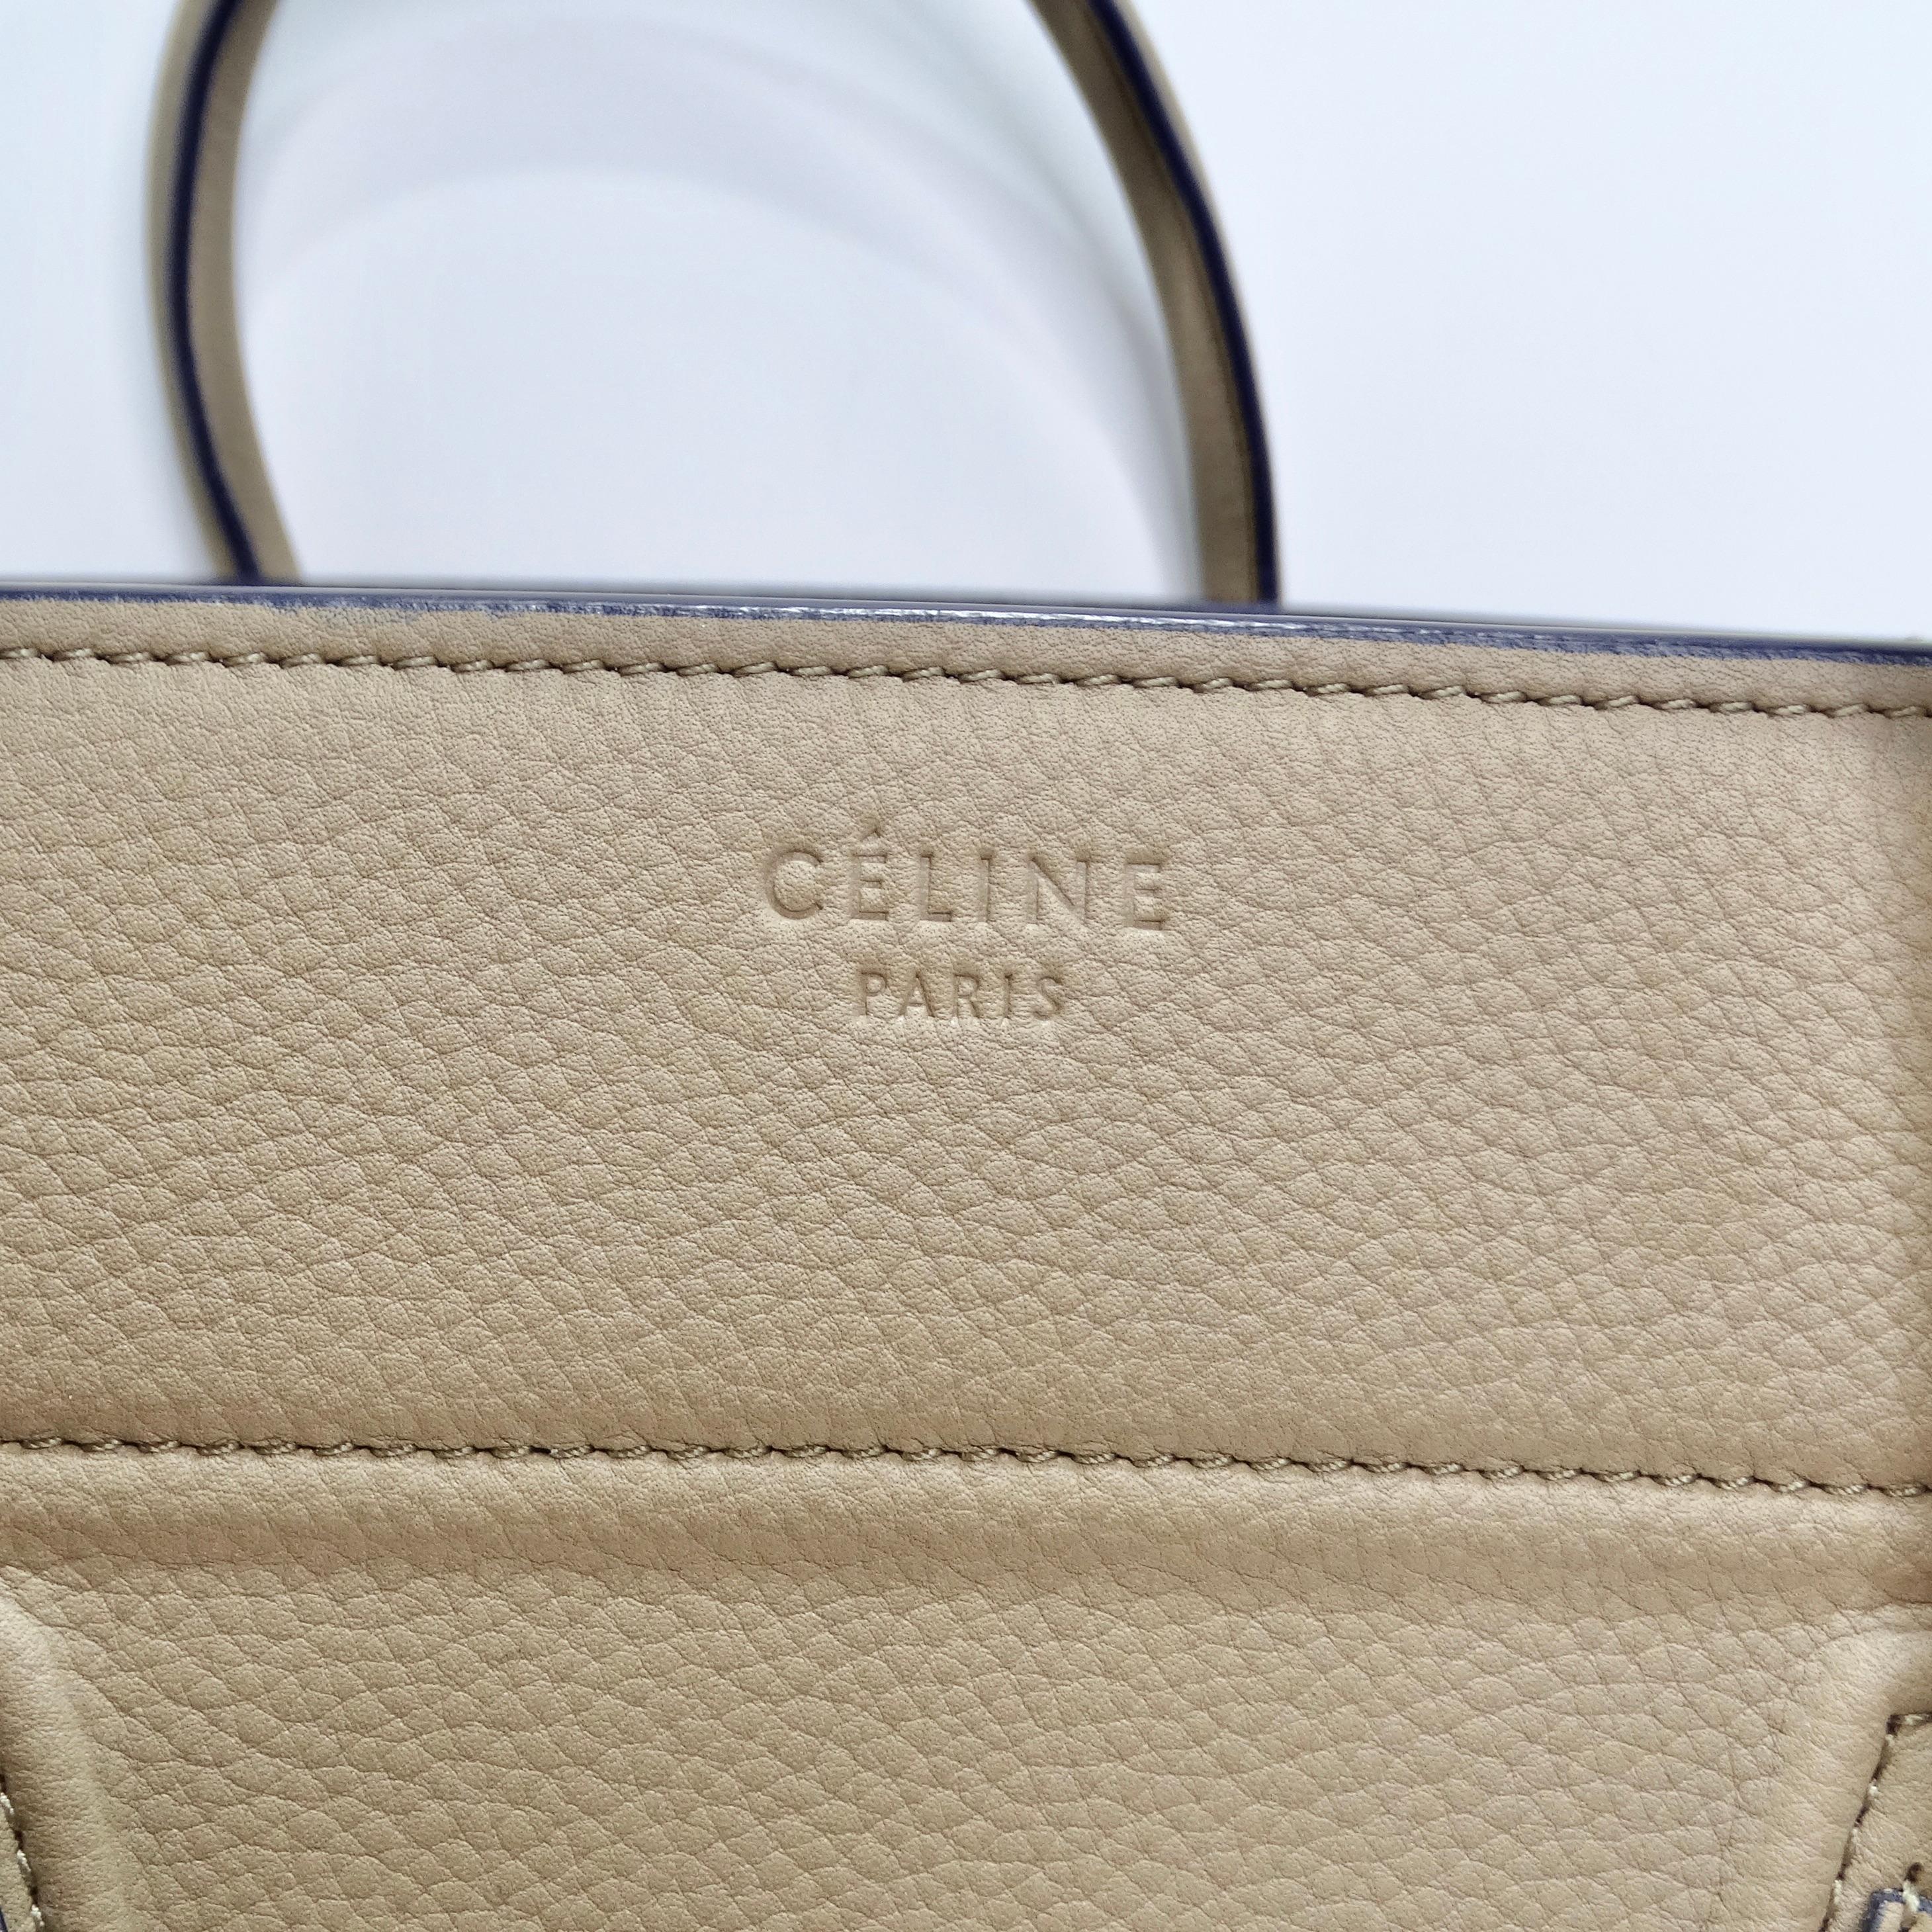 Introducing the Celine Beige Calfskin Leather Medium Phantom Luggage Tote Bag—a perfect fusion of modern sophistication and timeless style. This iconic tote bag, crafted in luxurious beige calfskin leather, is designed in the recognizable phantom